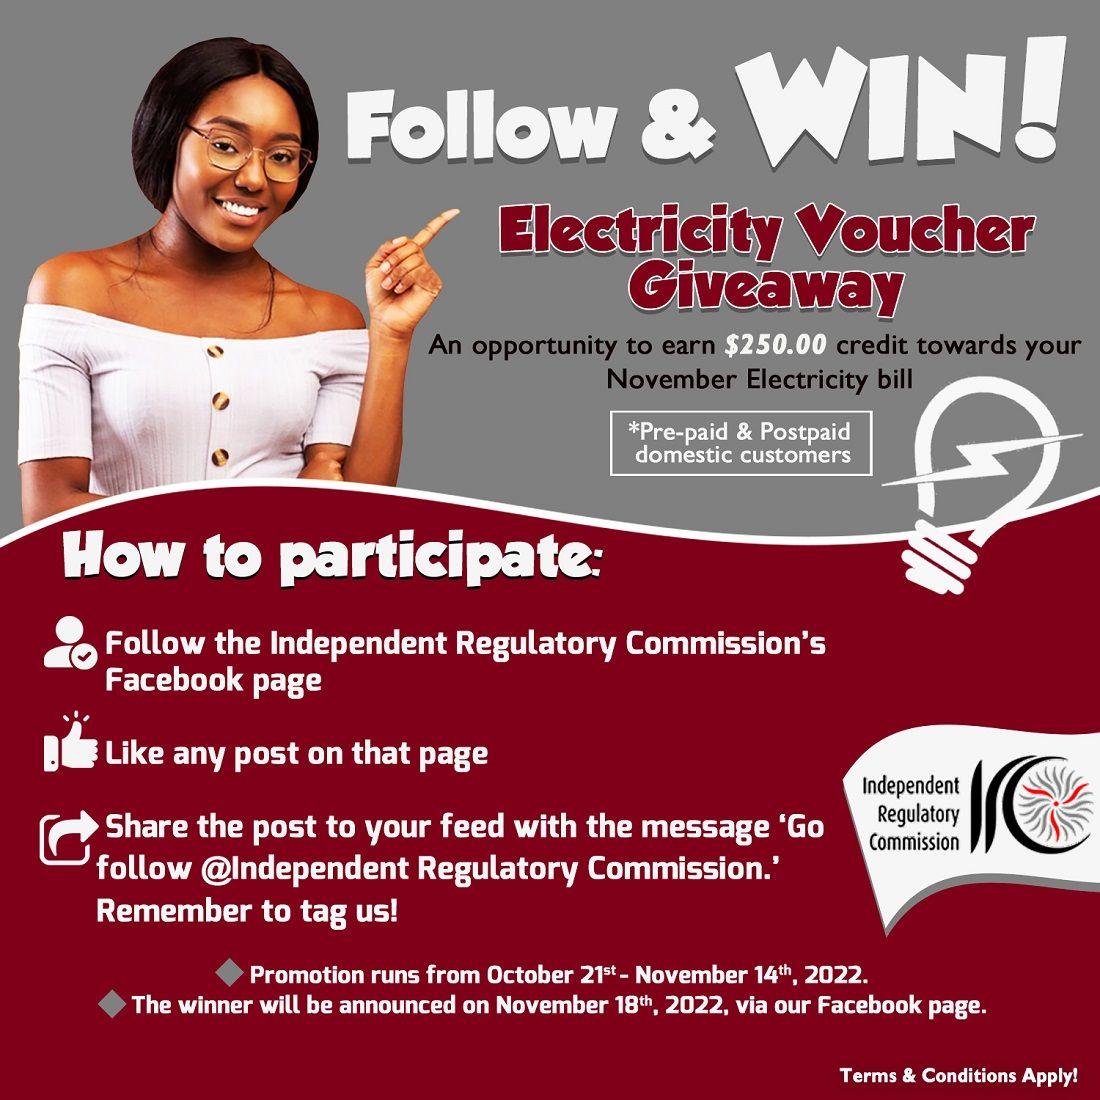 IRC has launched an Electricity Voucher Giveaway on Facebook